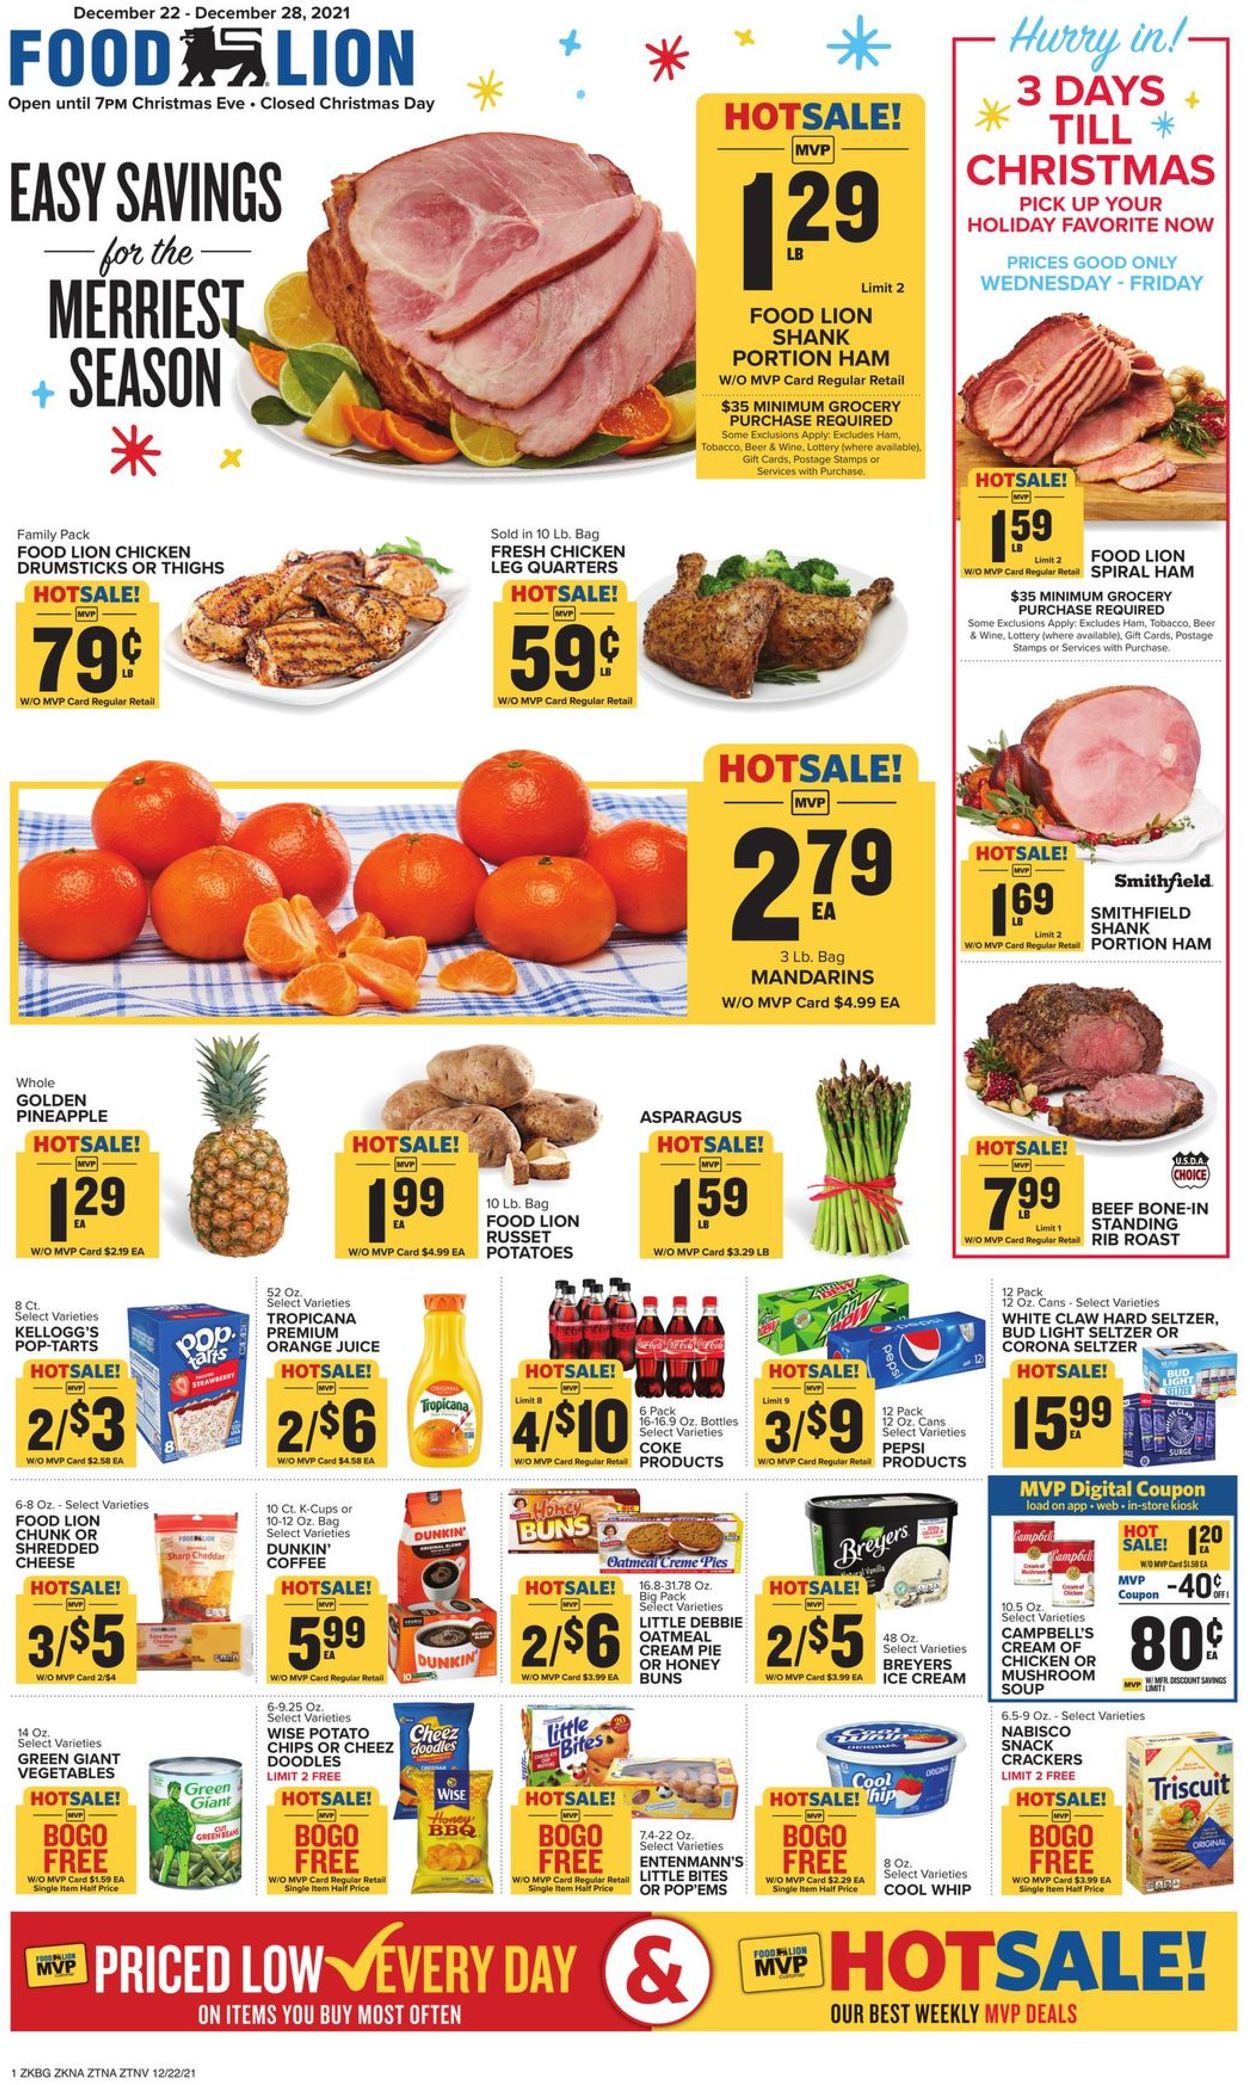 Food Lion HOLIDAY 2021 Current weekly ad 12/22 12/28/2021 frequent